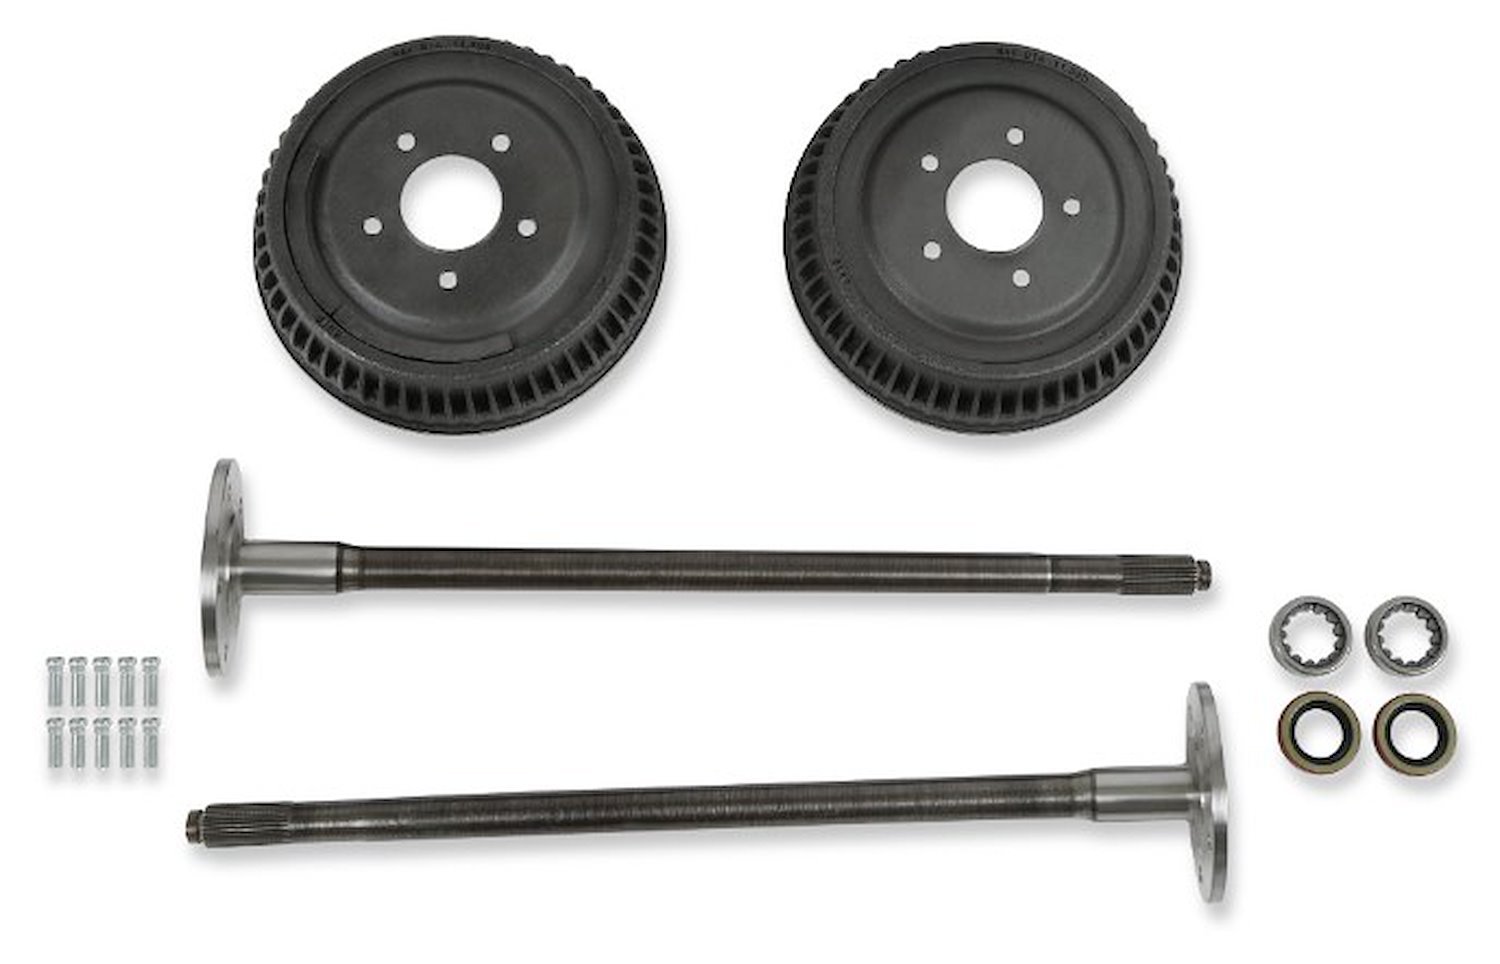 5-Lug Conversion Rear Axle Kit for 1963-1964 Chevy, GMC Trucks 2WD/4WD